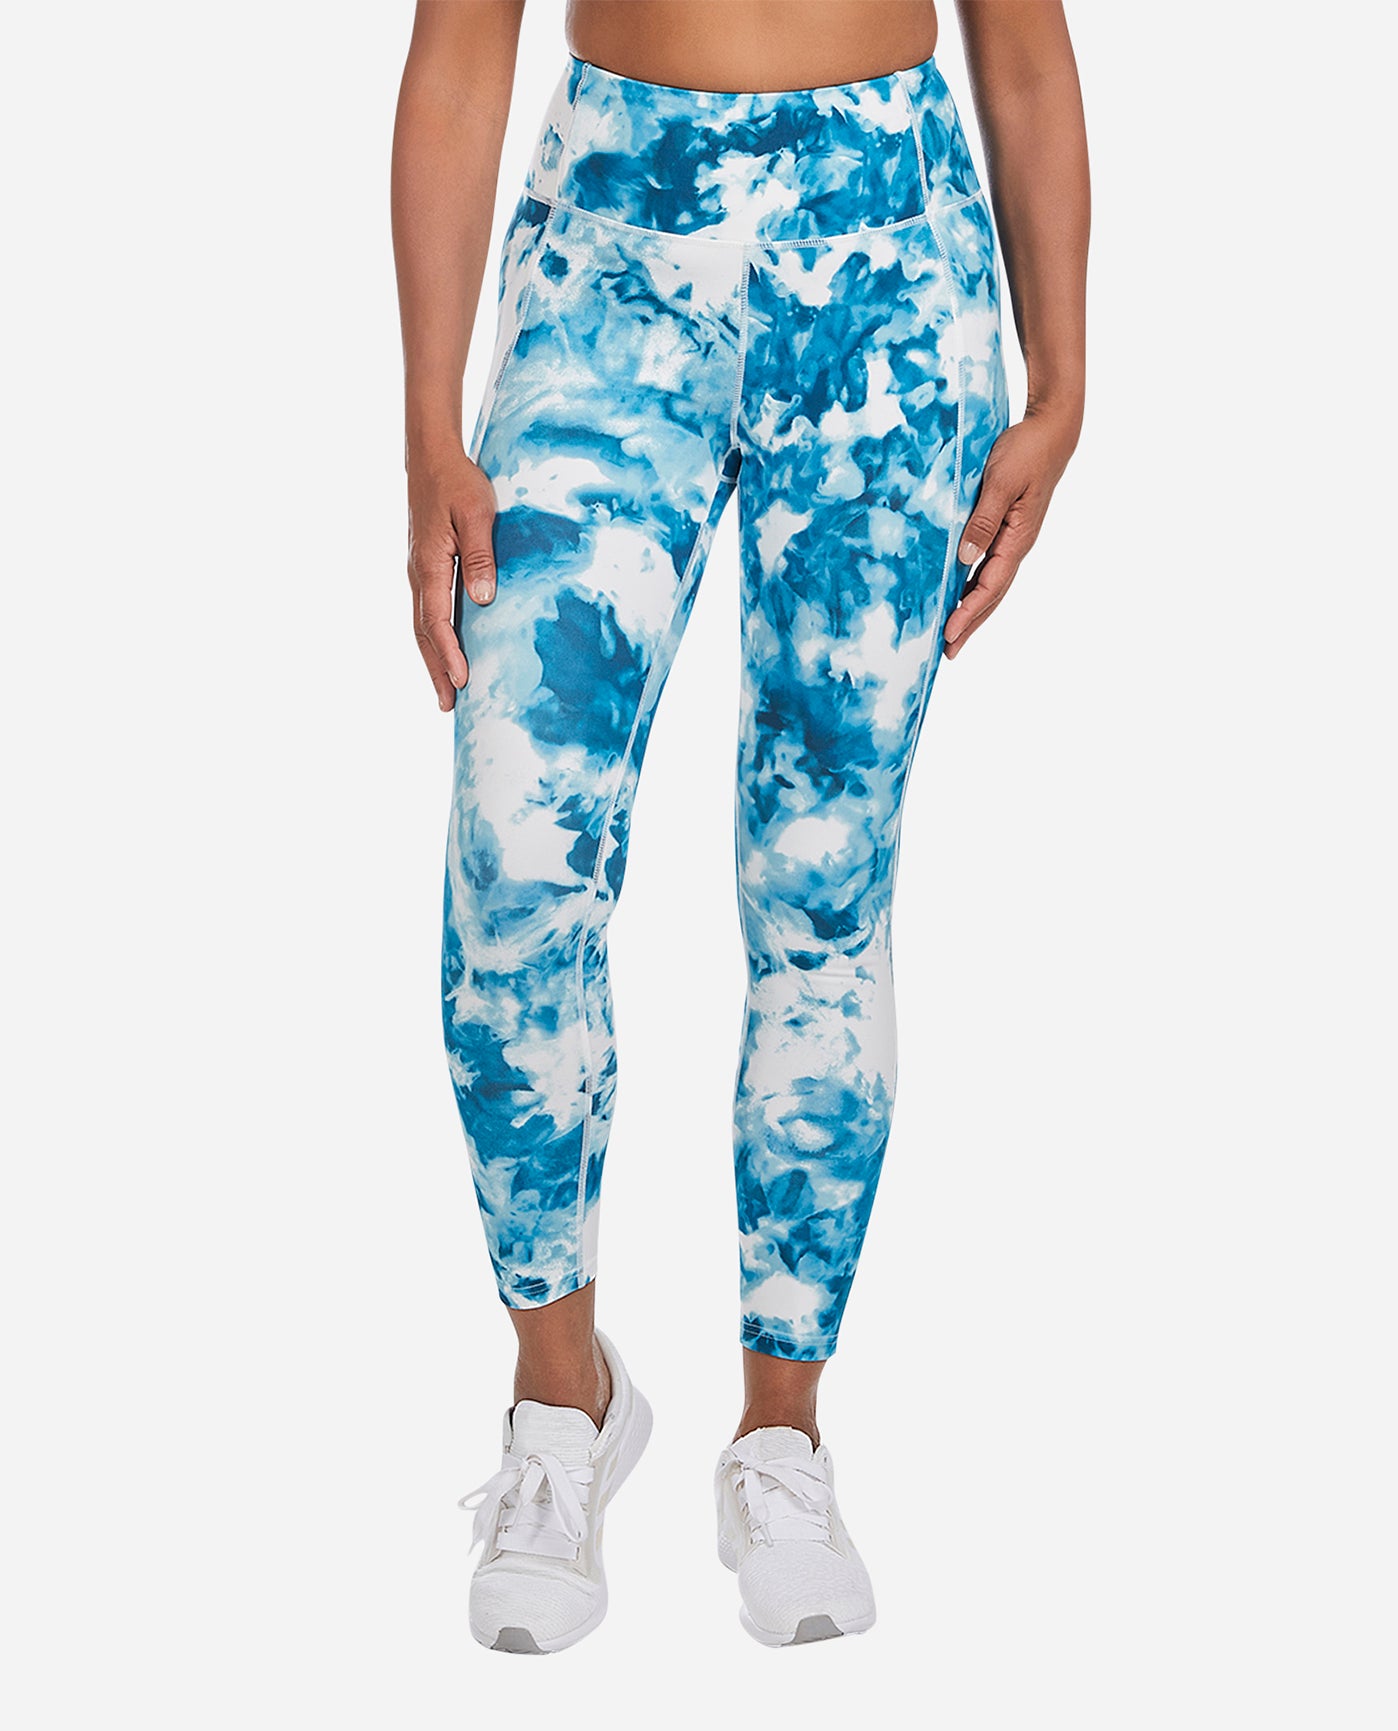 Back in stock tie dye leggings in size small and medium (gifted by @Ha